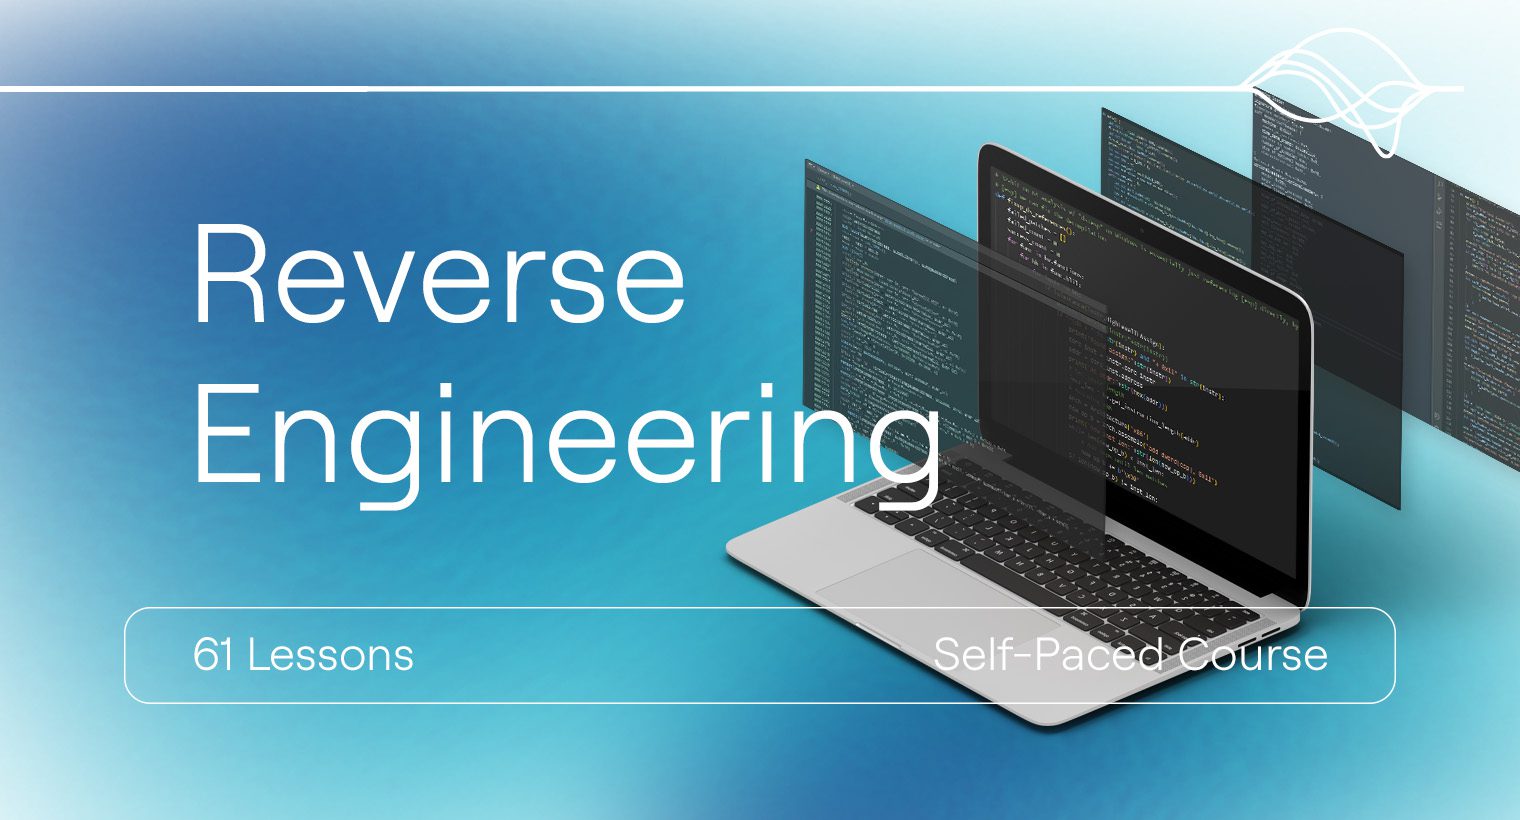 Reverse Engineering video course